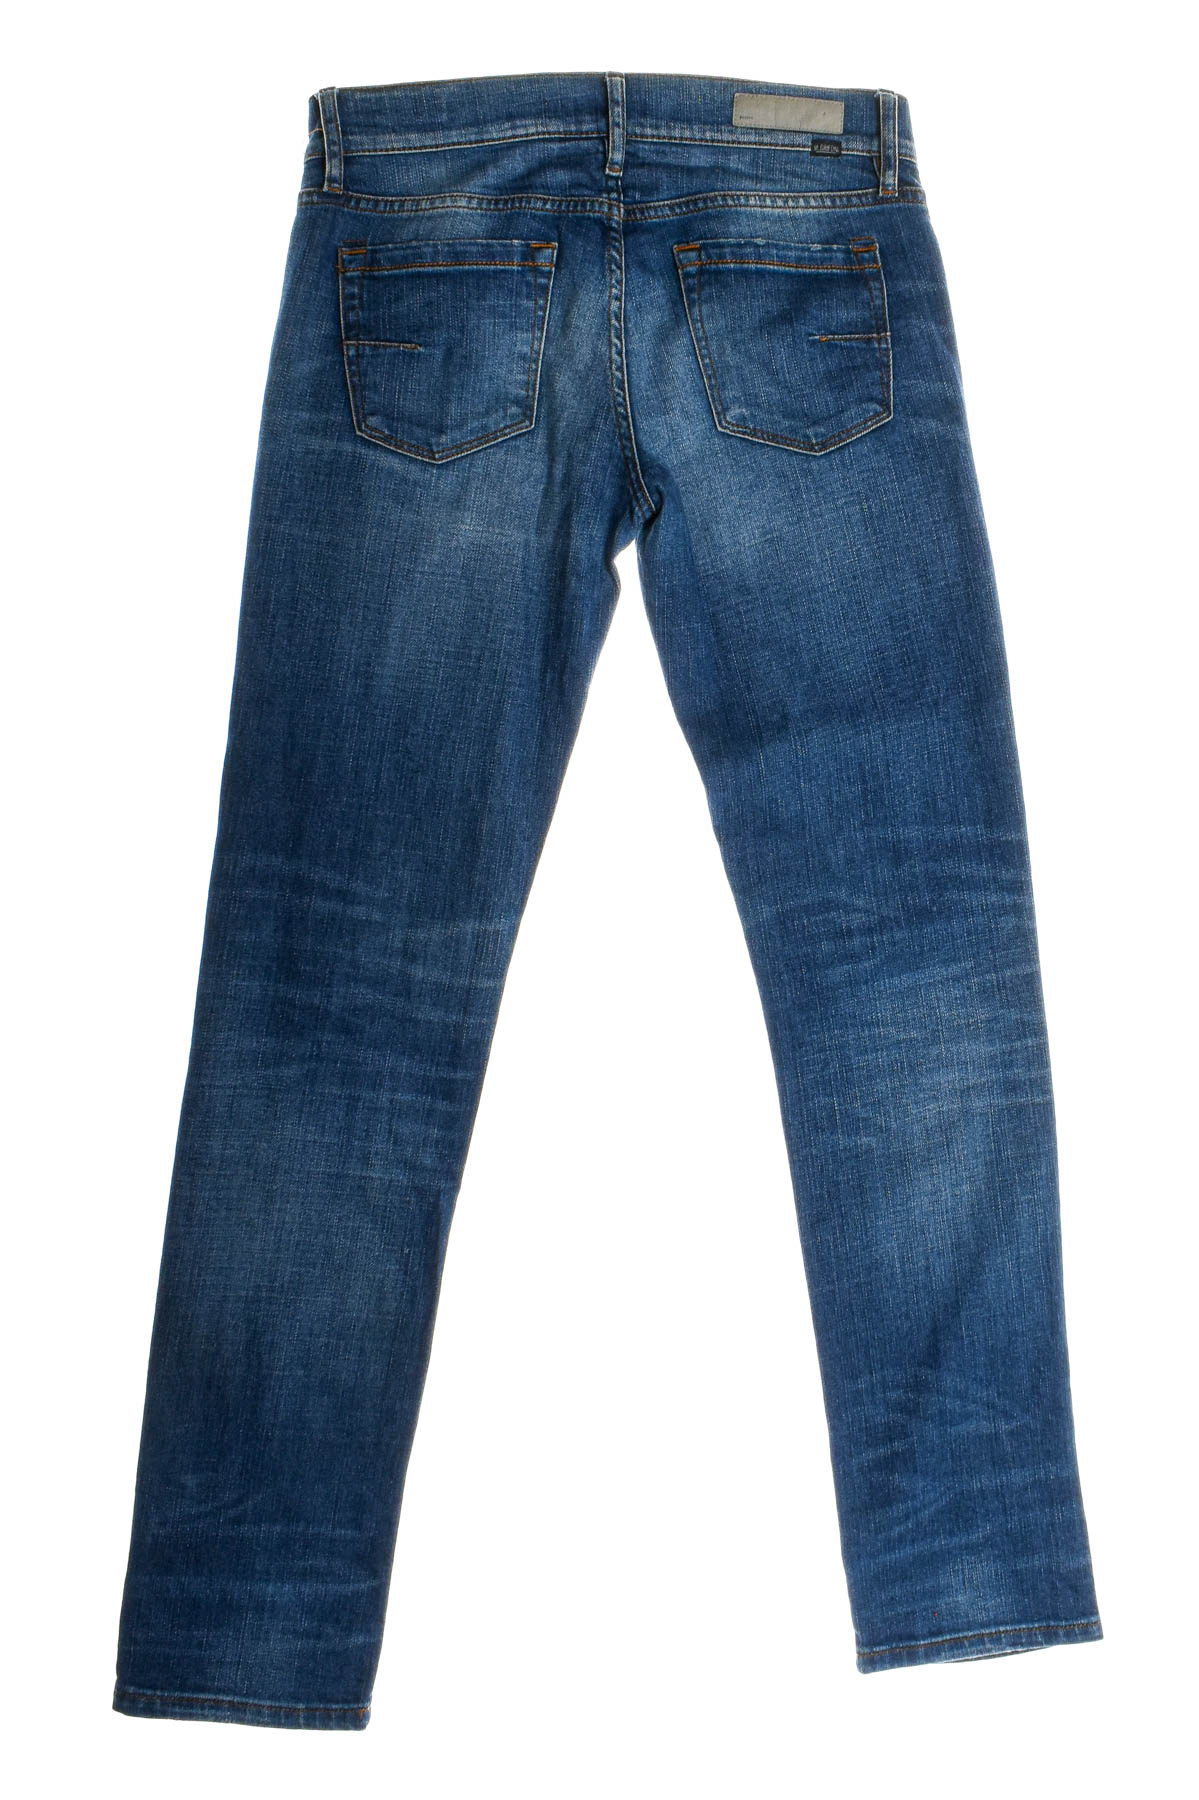 Women's jeans - Mauro Grifoni - 1